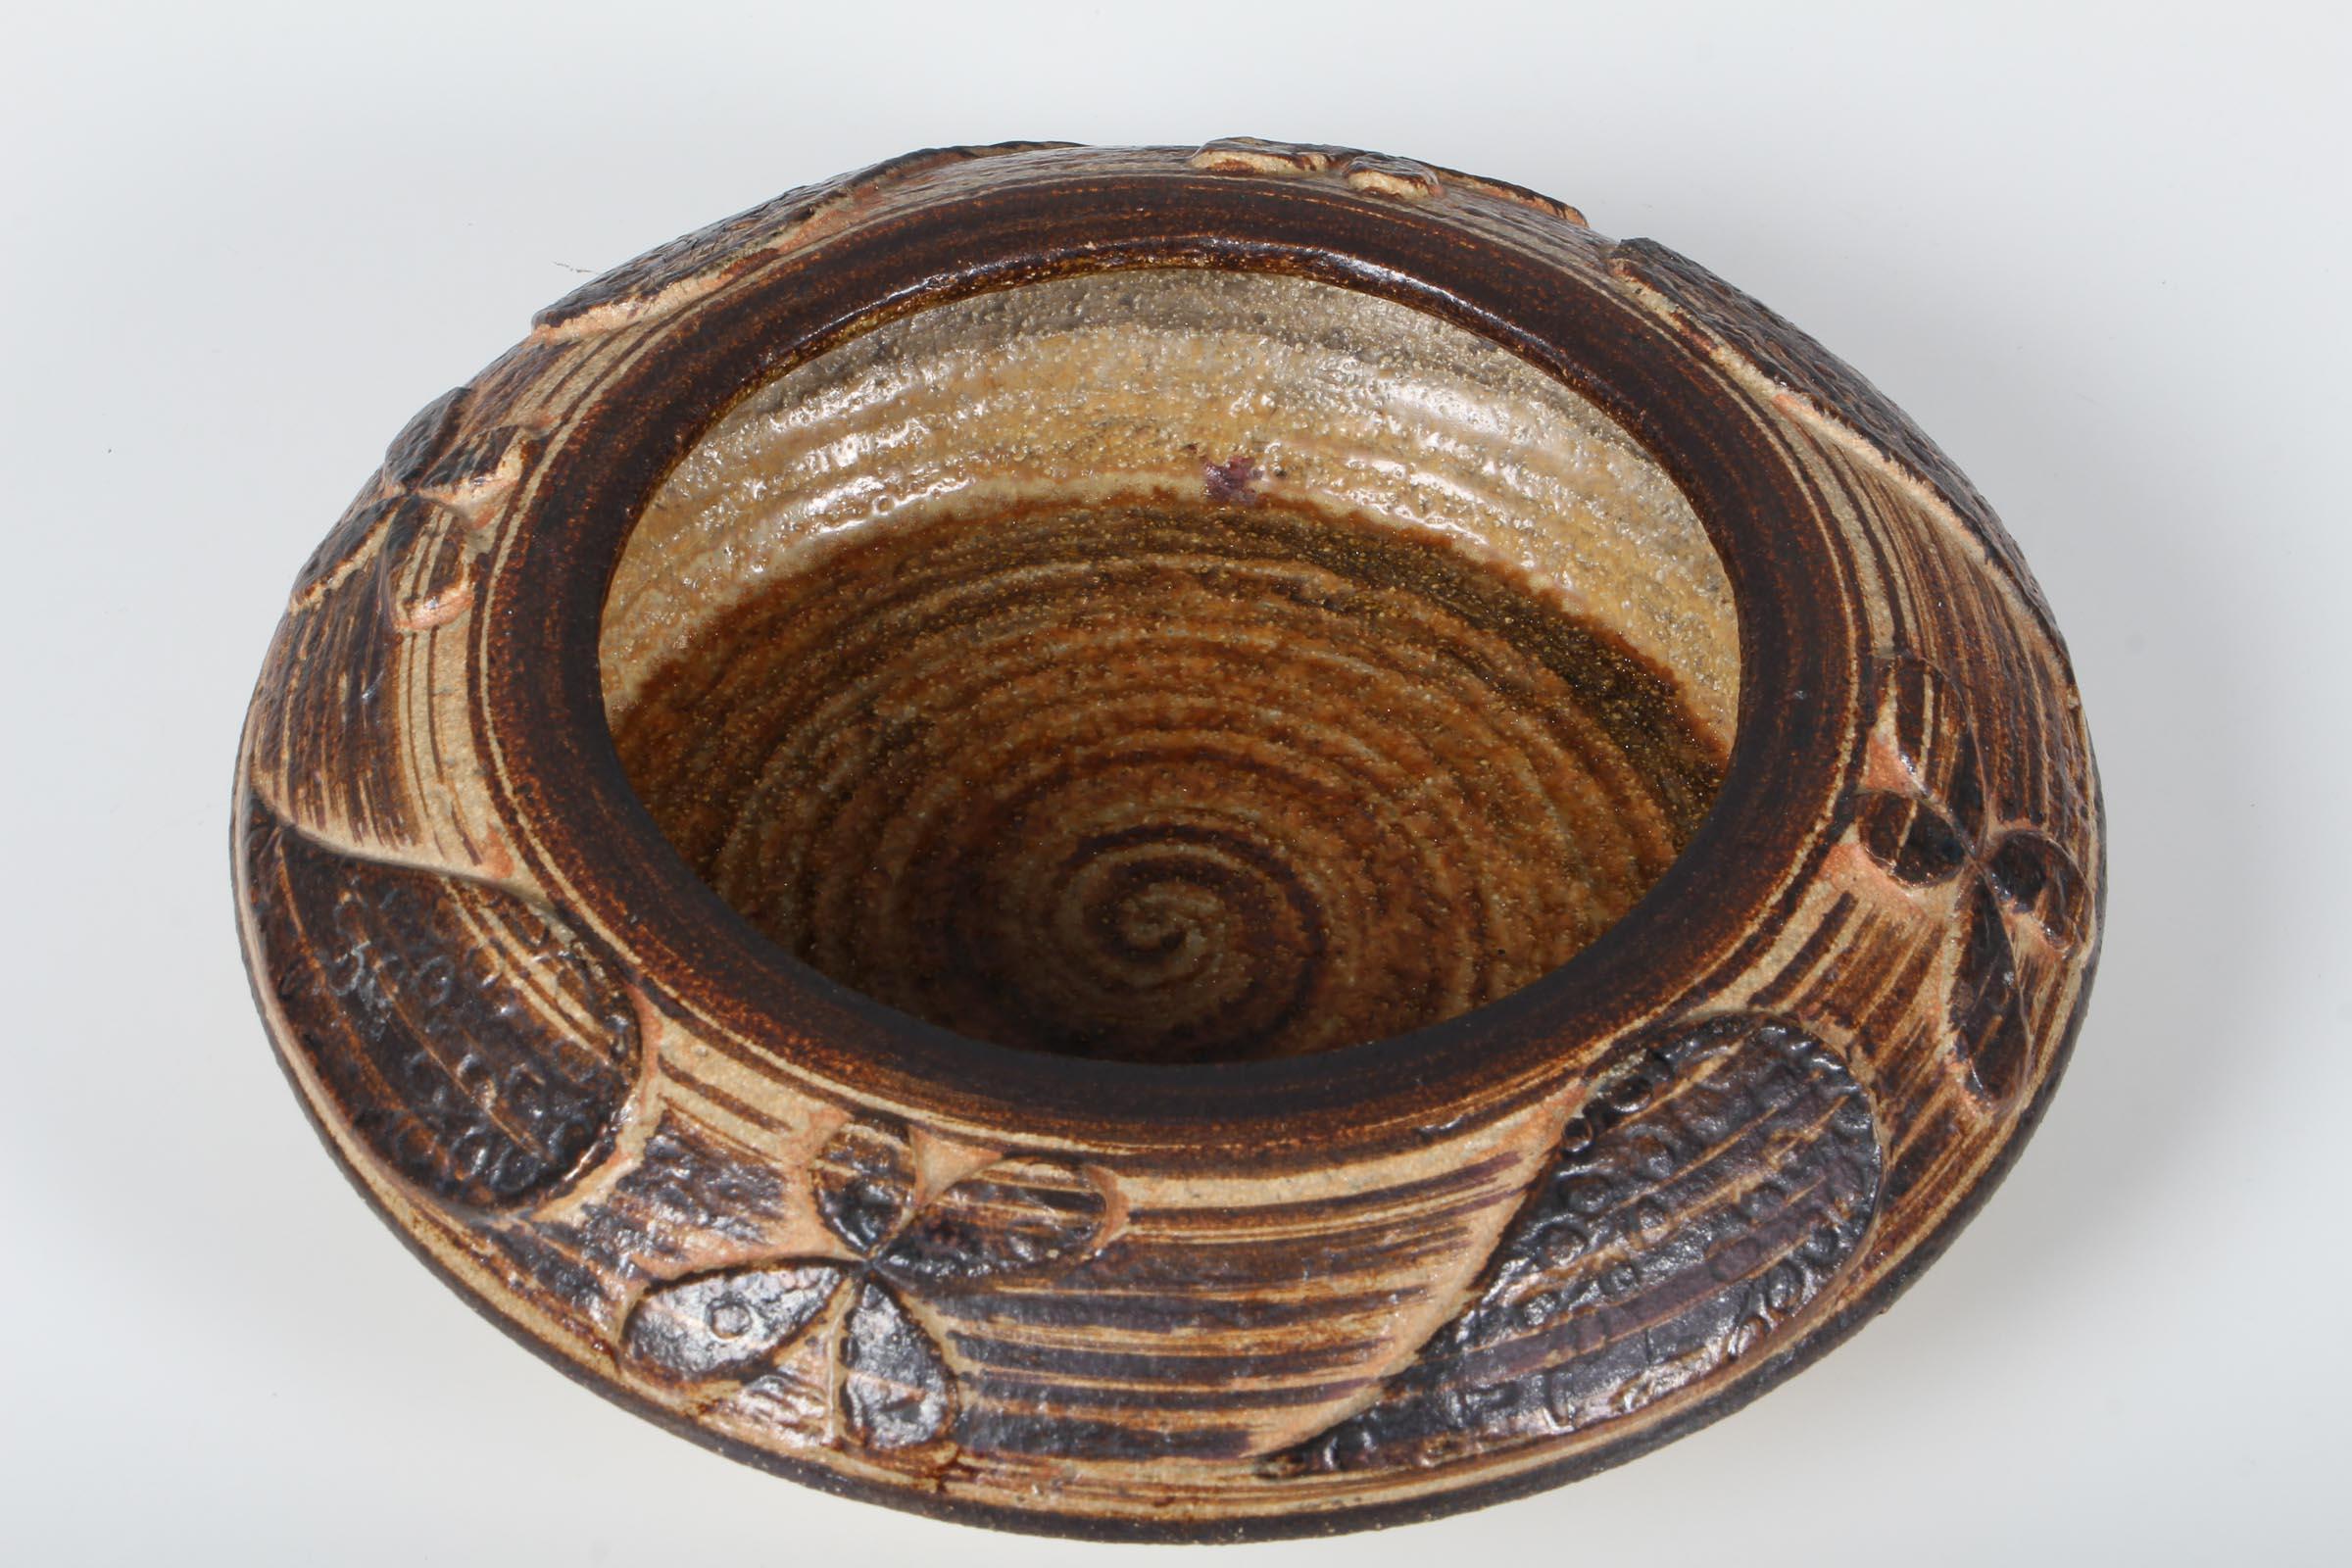 Unique handmade Danish modern bowl with brown glazing by German sculptor and designer Haico Nitzsche for Danish Søholm Pottery. Manufactured on the Danish island of Bornholm in the 1970s. Sculptural shape that reveals the designer's interest in